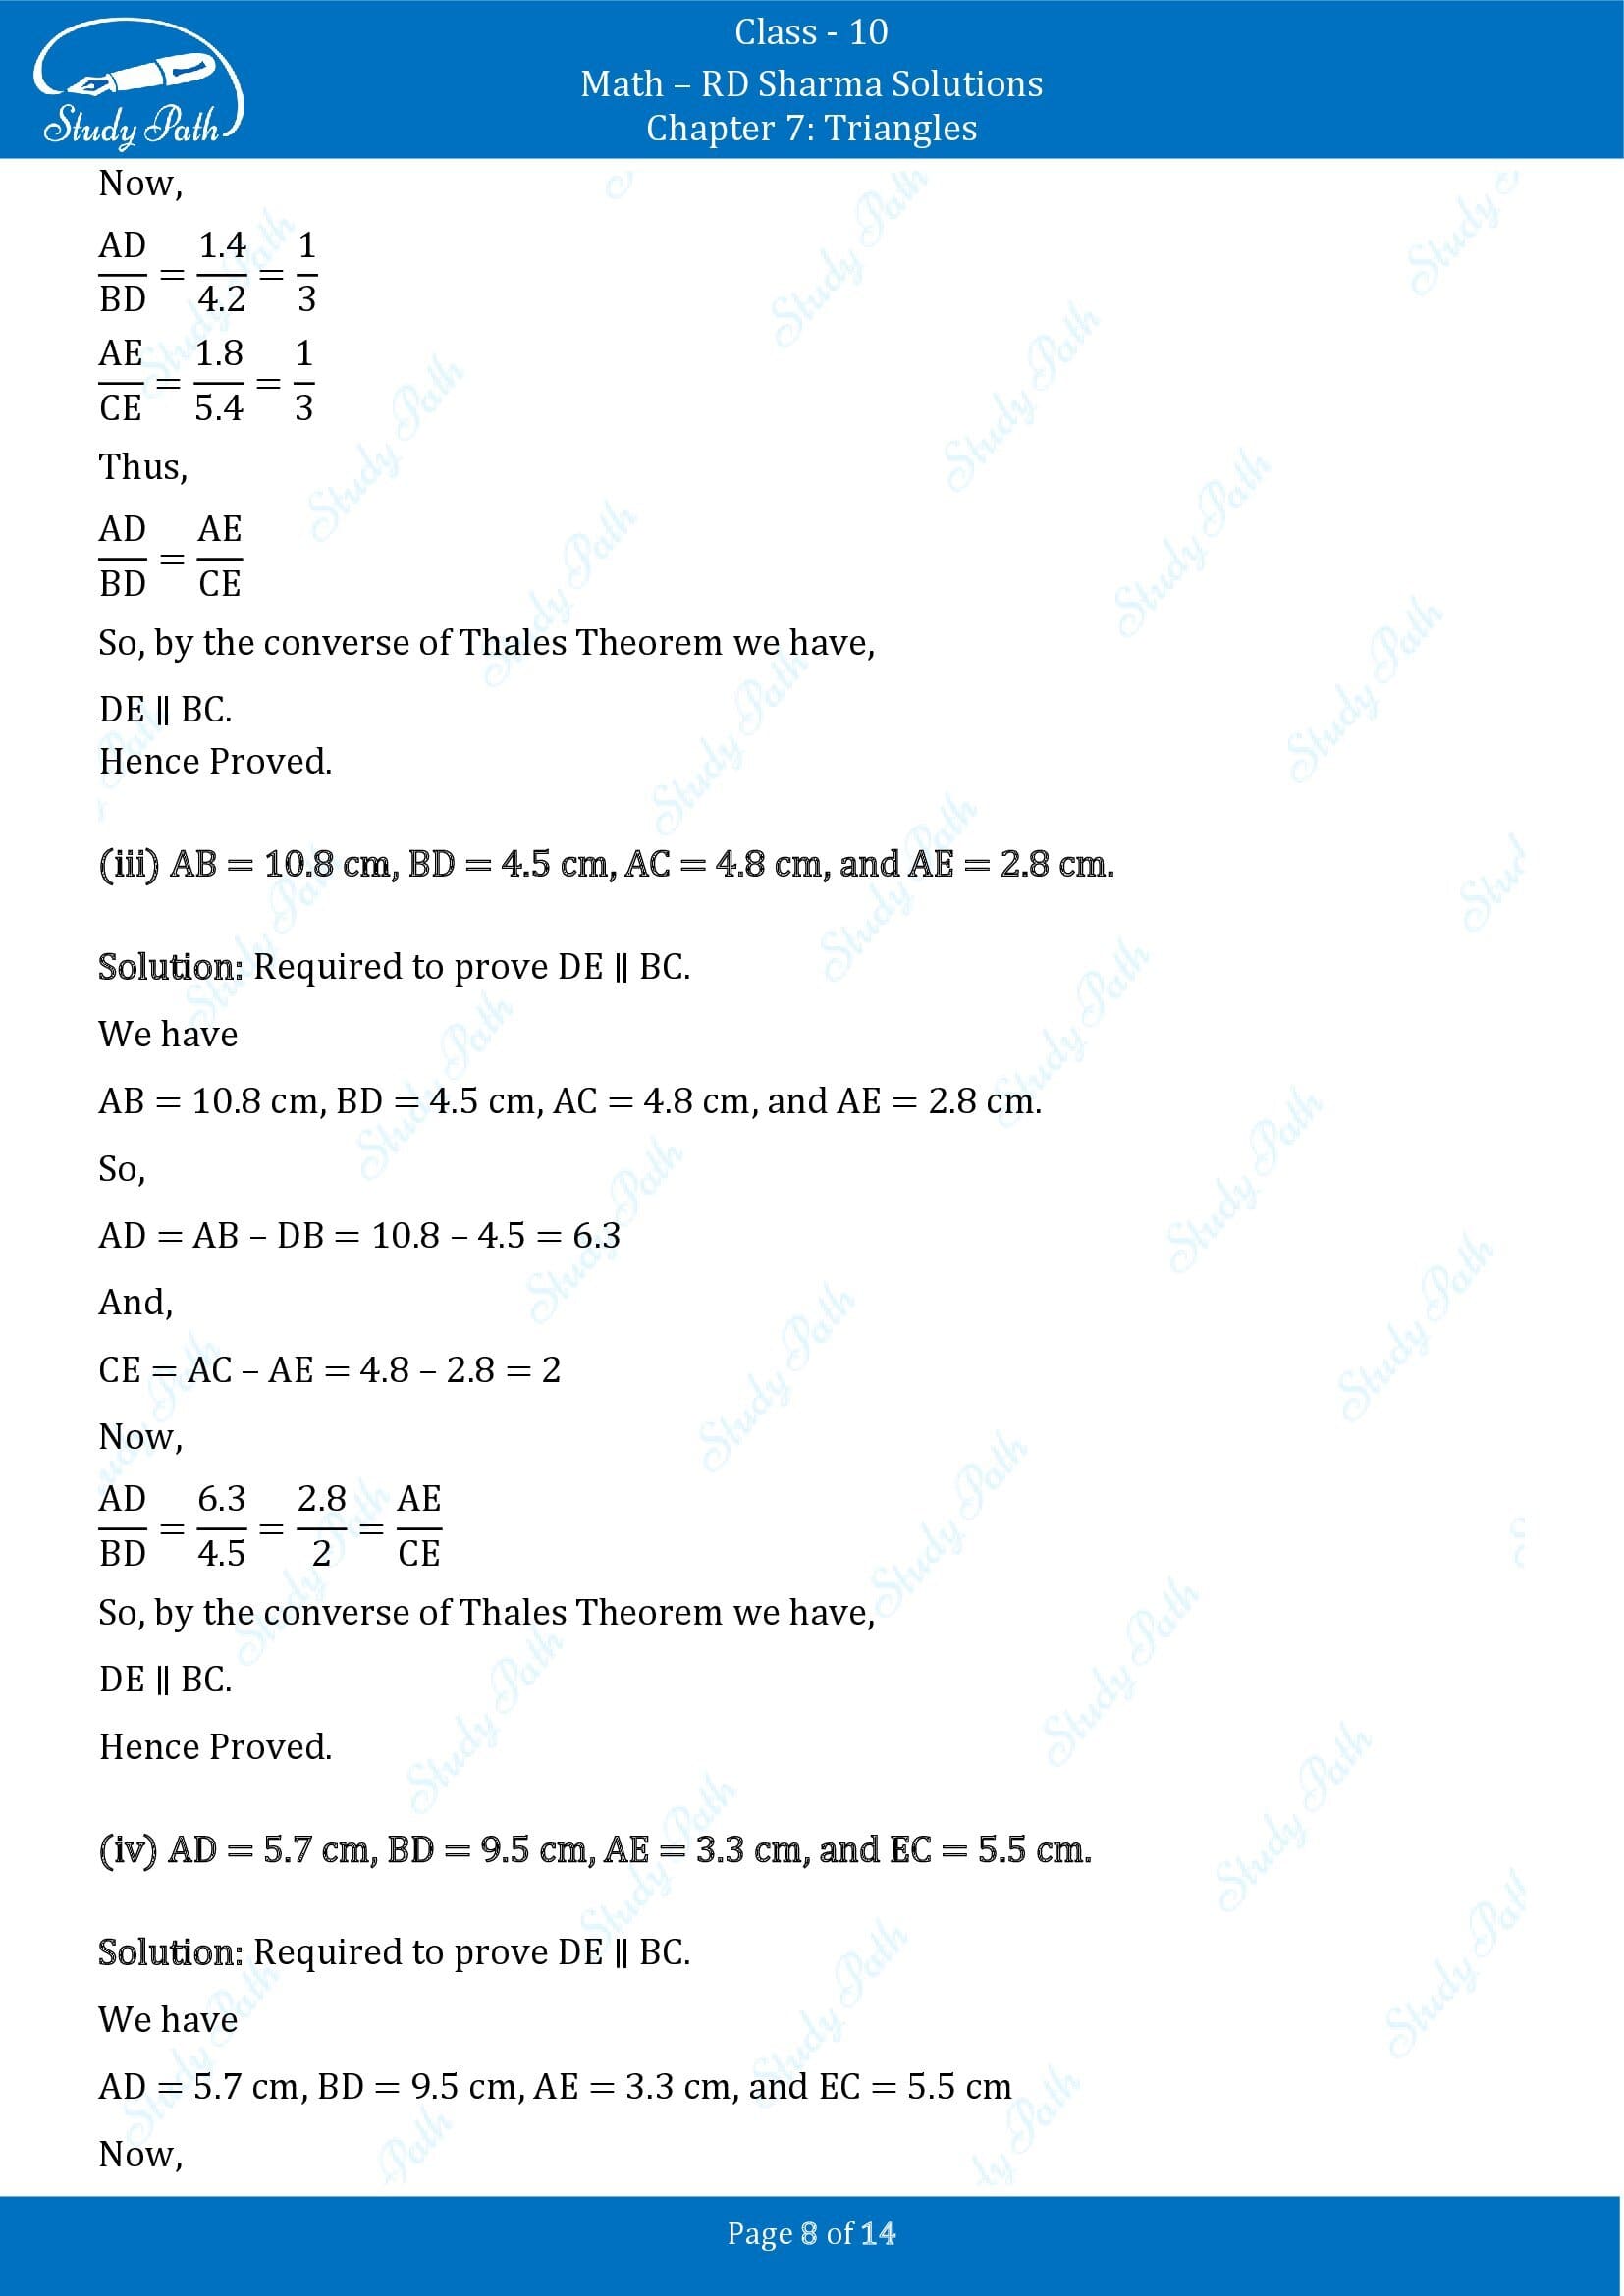 RD Sharma Solutions Class 10 Chapter 7 Triangles Exercise 7.2 00008